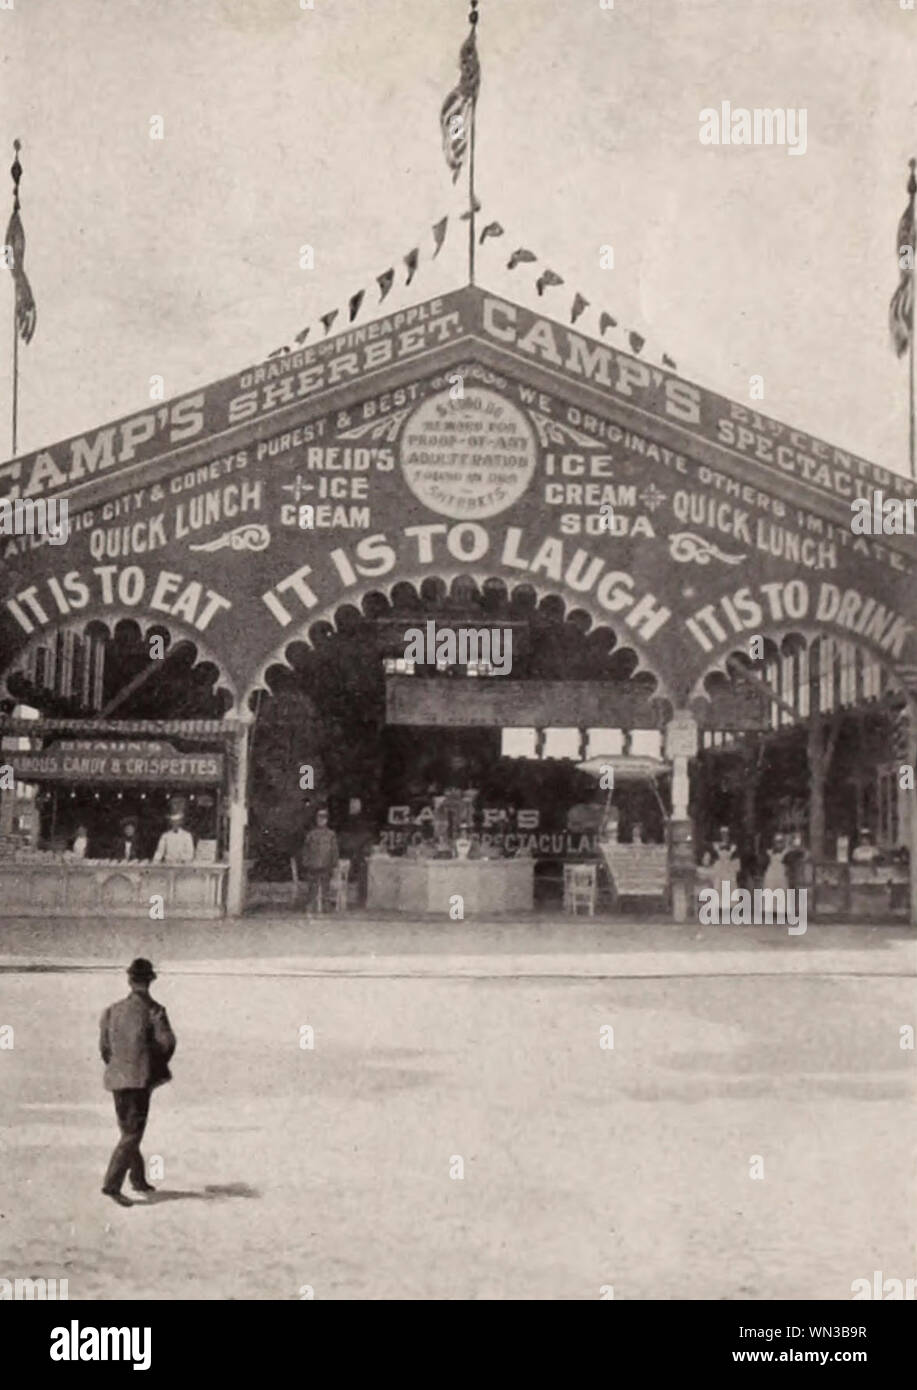 Camp's Show, Coney Island, vers 1904 Banque D'Images